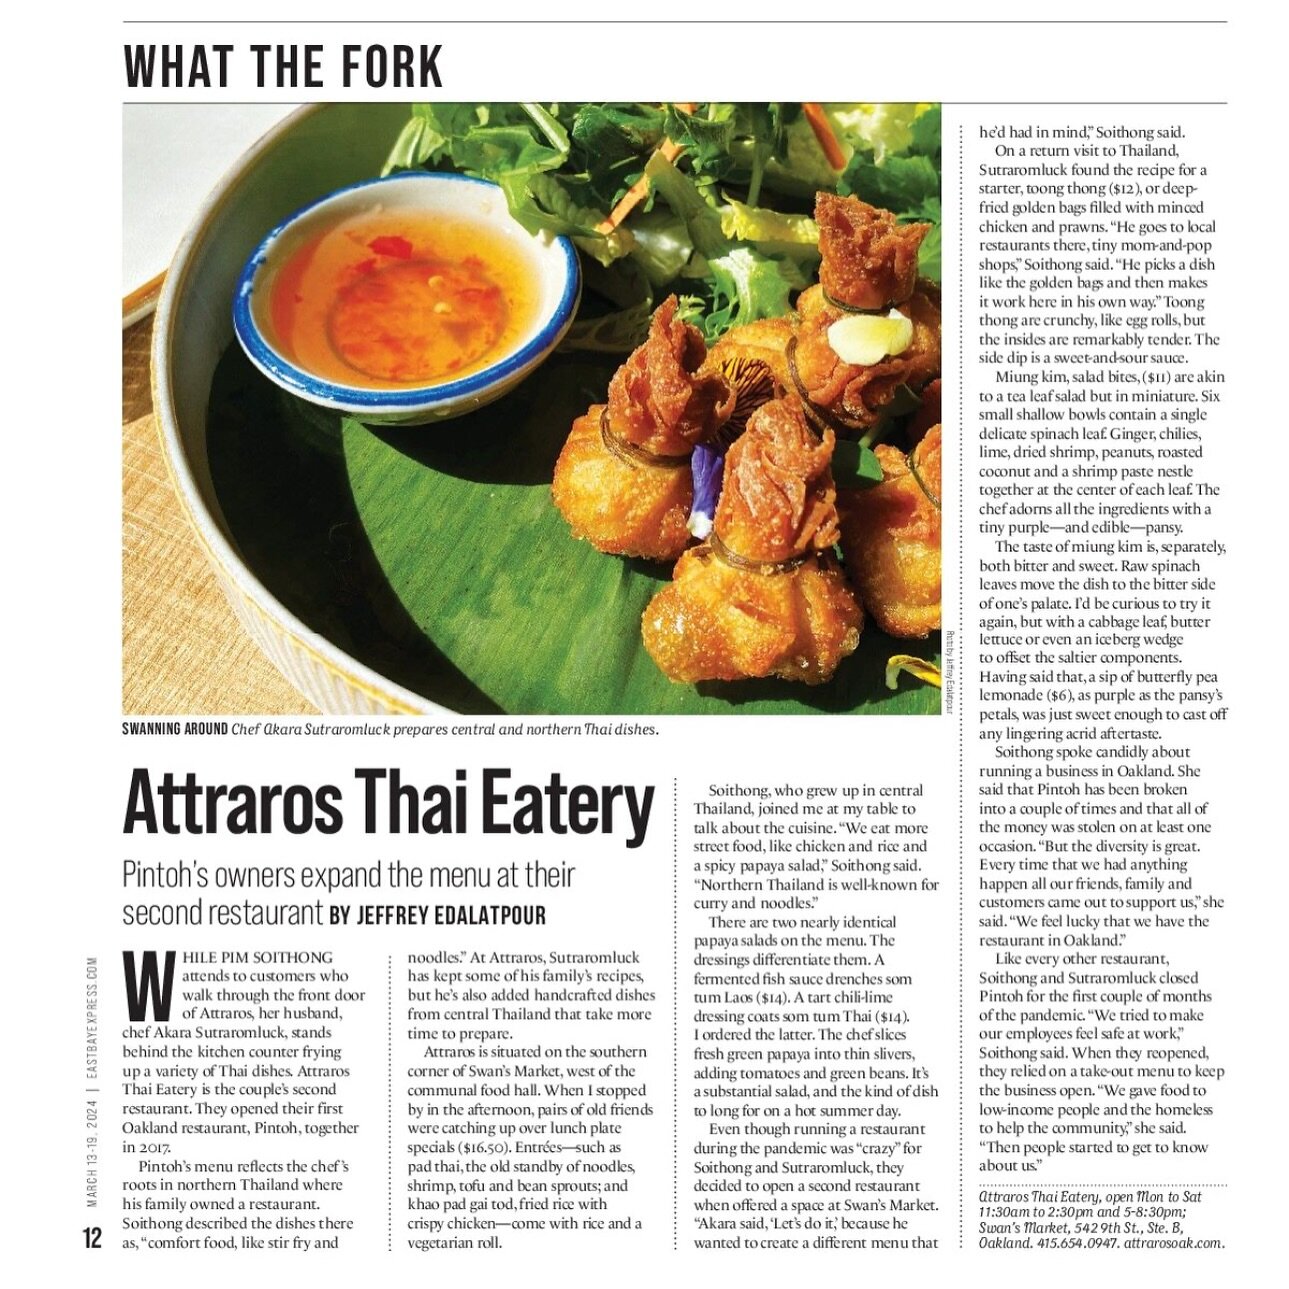 Thank you to @eastbayexpress for including us in the article. We are grateful for this opportunity. :) Thank YOU! ✨🇹🇭 We&rsquo;re open, come hang out. 🤩

🔗 https://eastbayexpress.com/attraros-thai-eatery/

🔗 Order take out/ Make reservation link